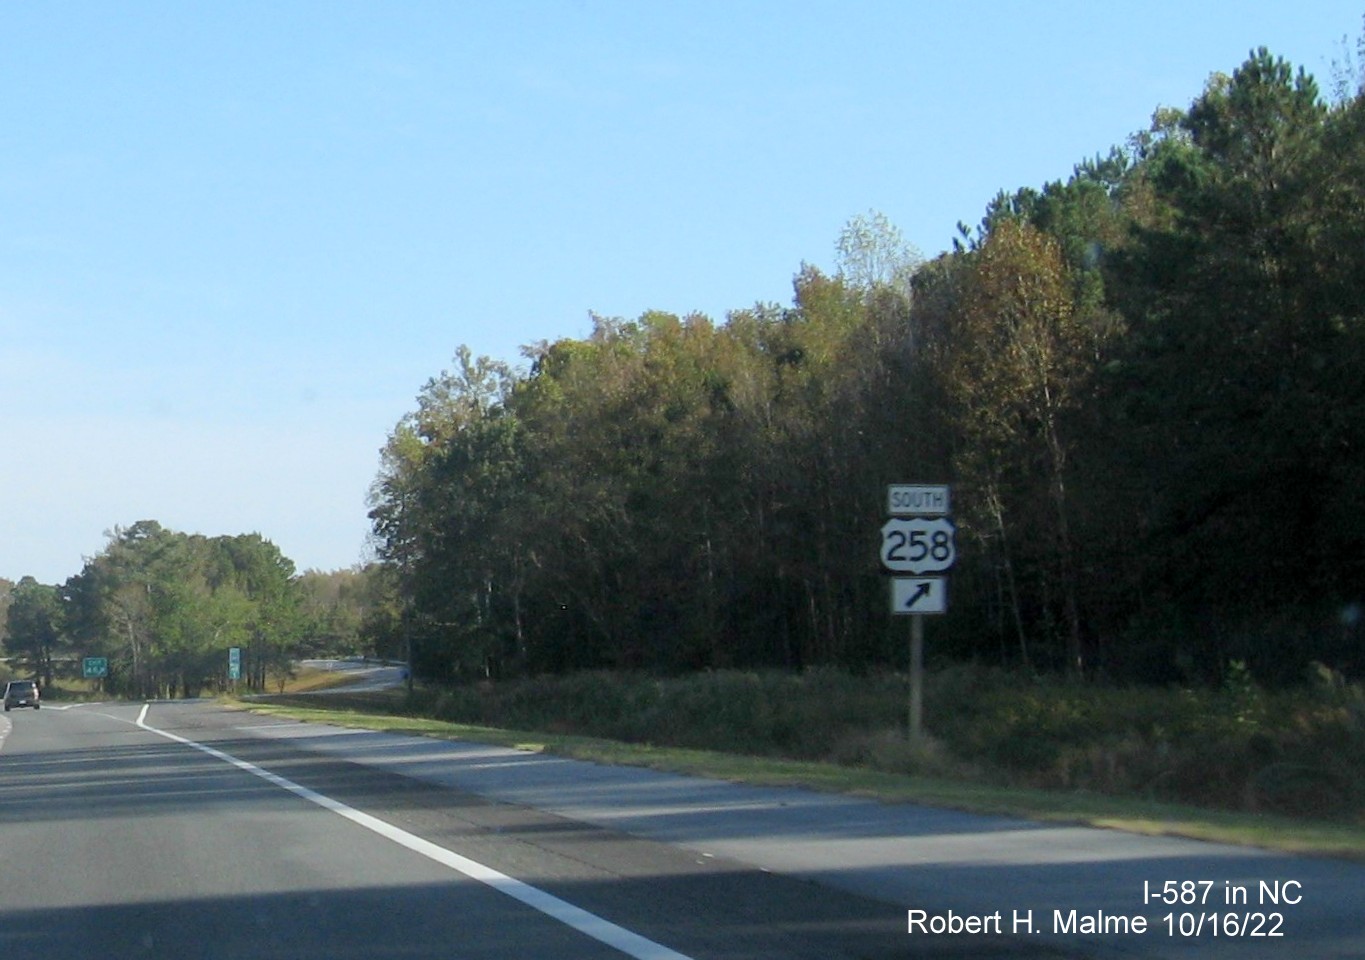 Image of ground mounted ramp sign for Wesley Chapel Road (US 258 South) exit with new I-587 milepost exit number on I-587 East in Farmville, October 2022